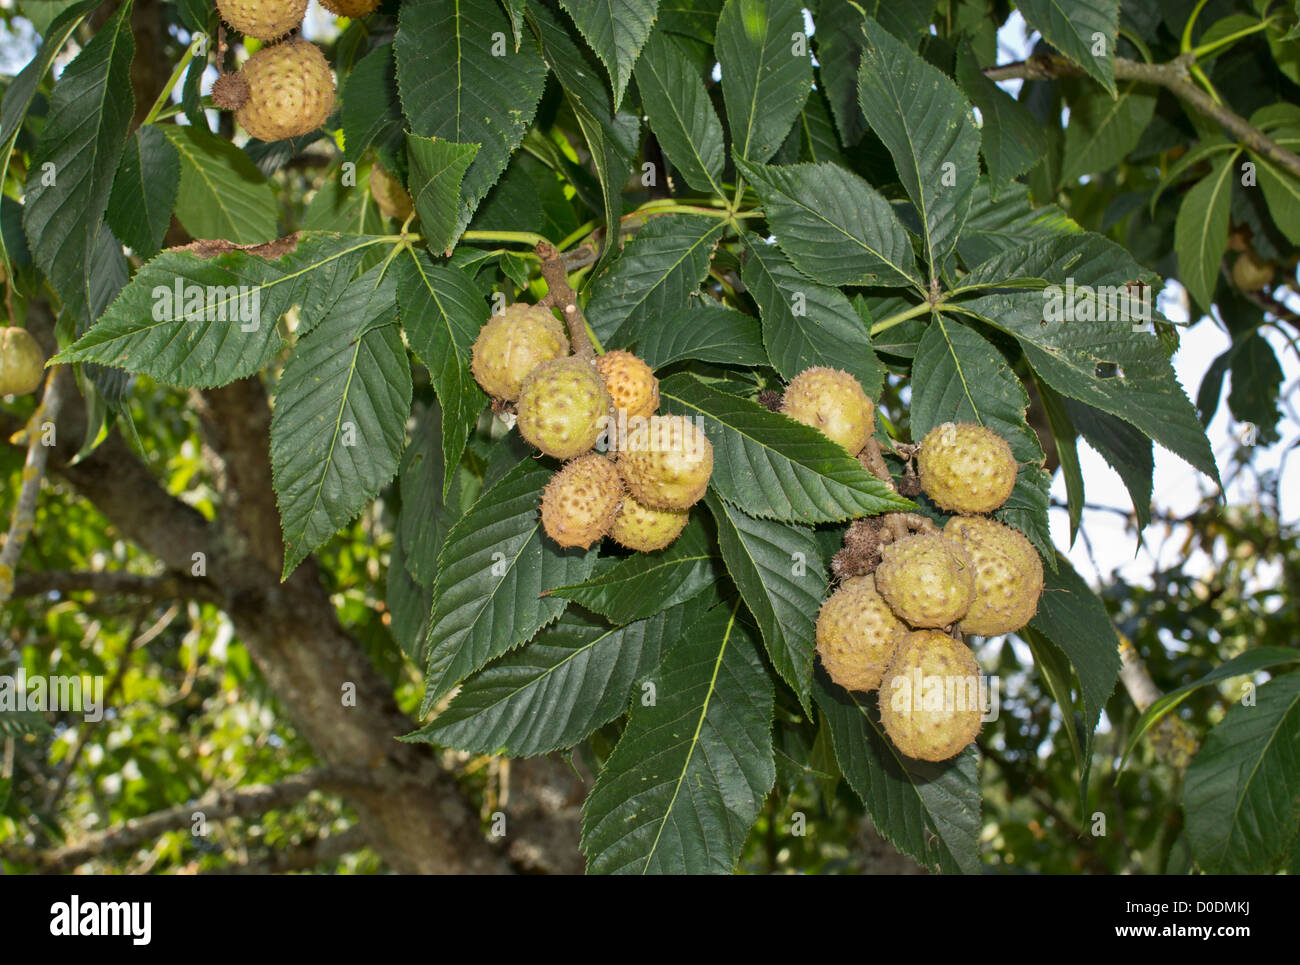 Ohio buckeye (Aesculus glabra) in fruit in autumn. From central USA. Stock Photo